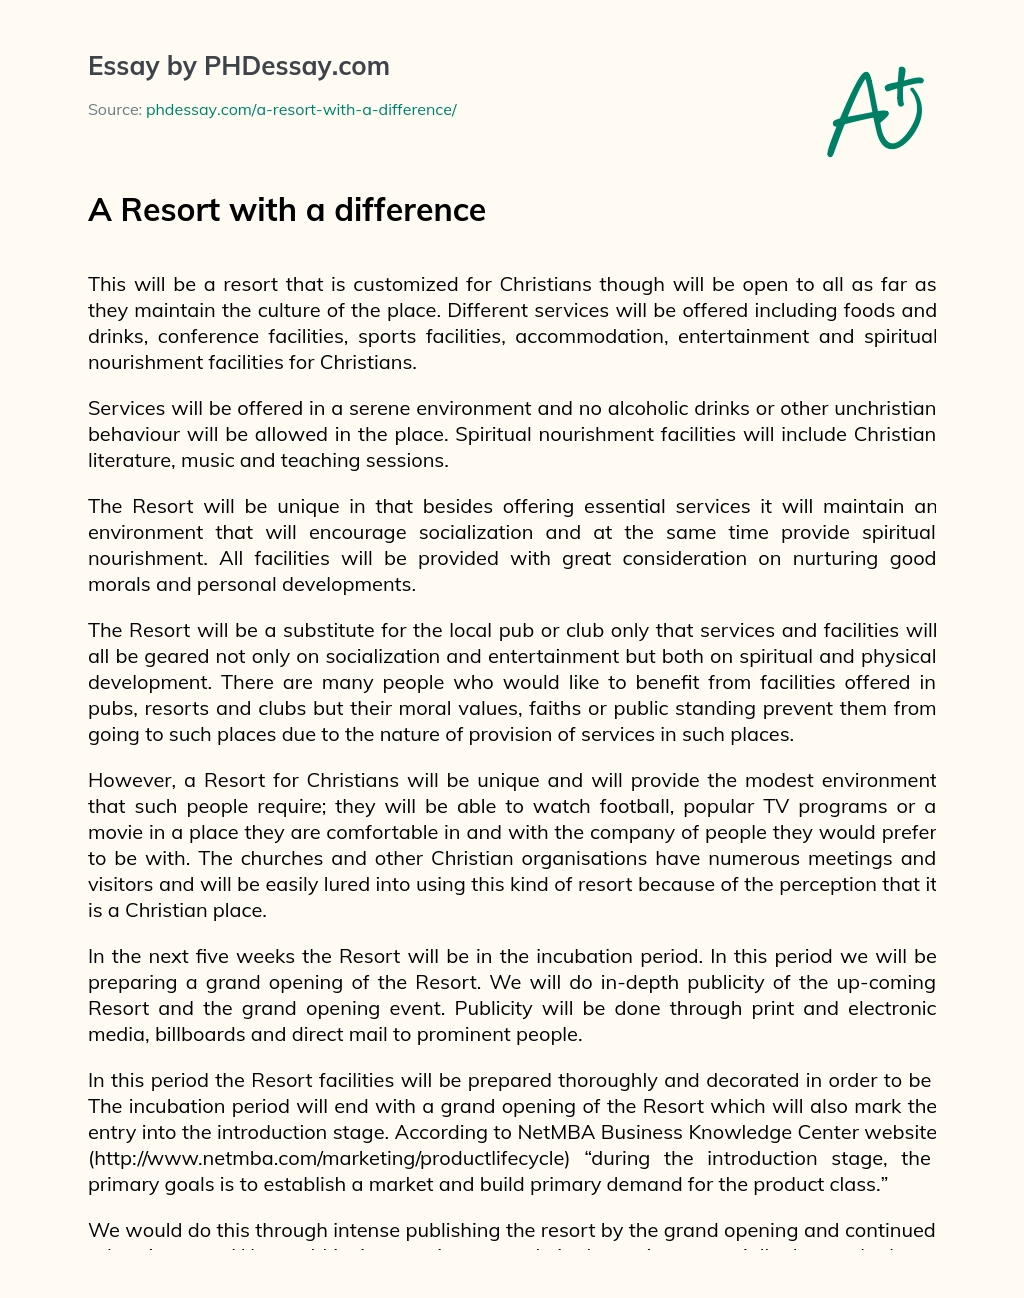 A Resort with a difference essay